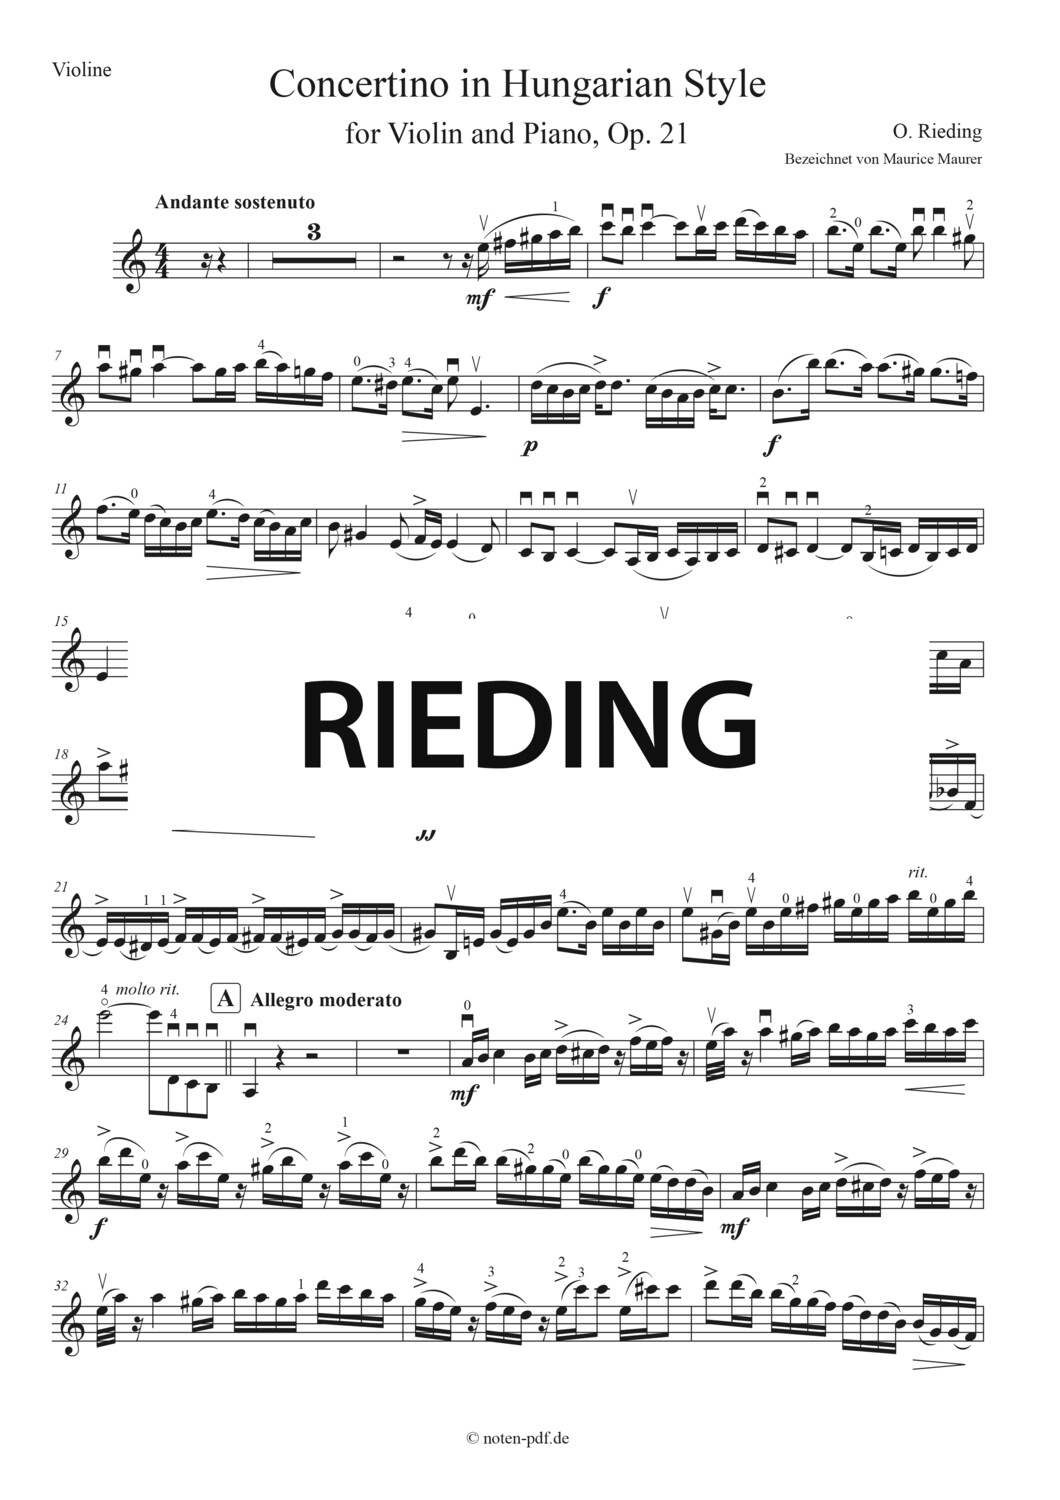 Rieding: Concerto in "Hungarian Style" Op. 21, All Movements